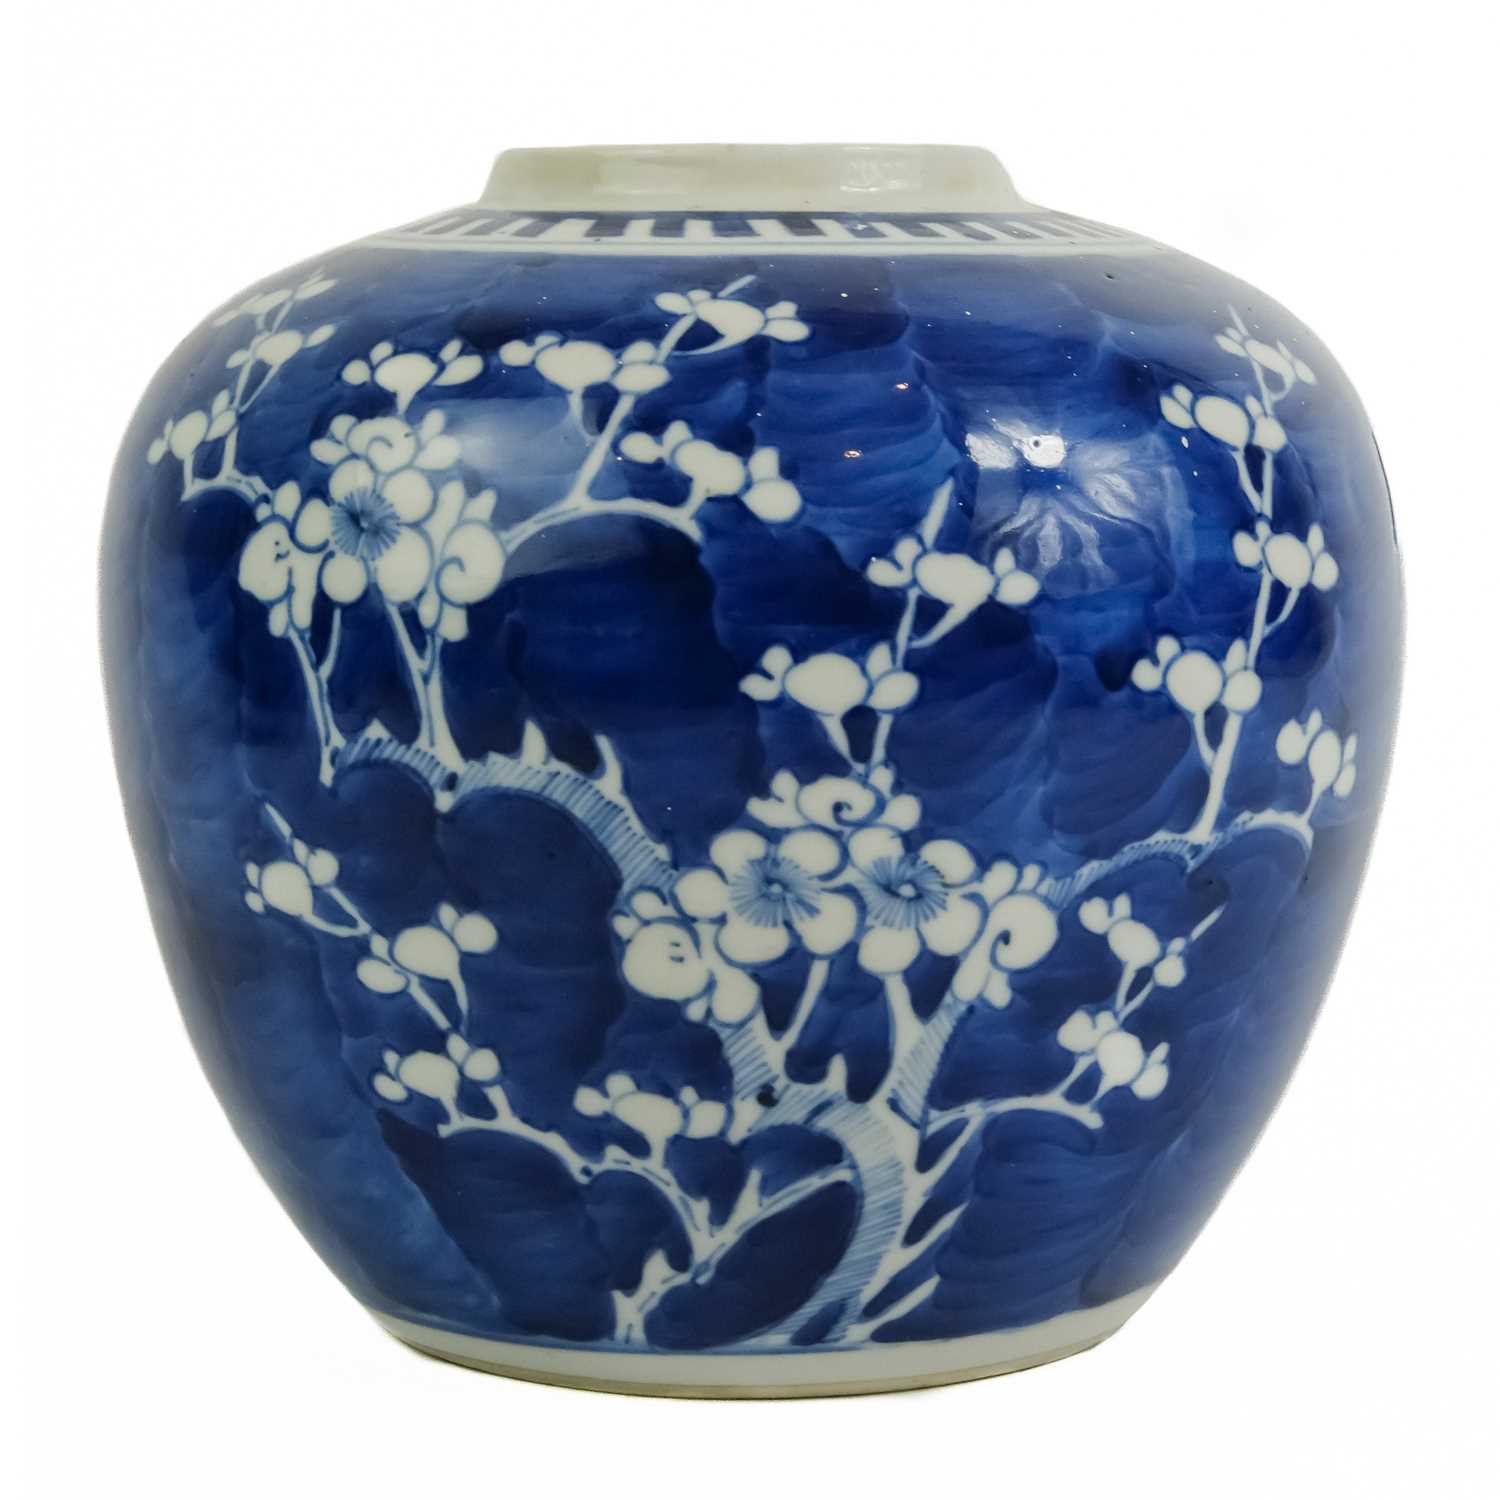 Two Chinese blue and white prunus blossom pattern ginger jars, late 19th century. - Image 6 of 10